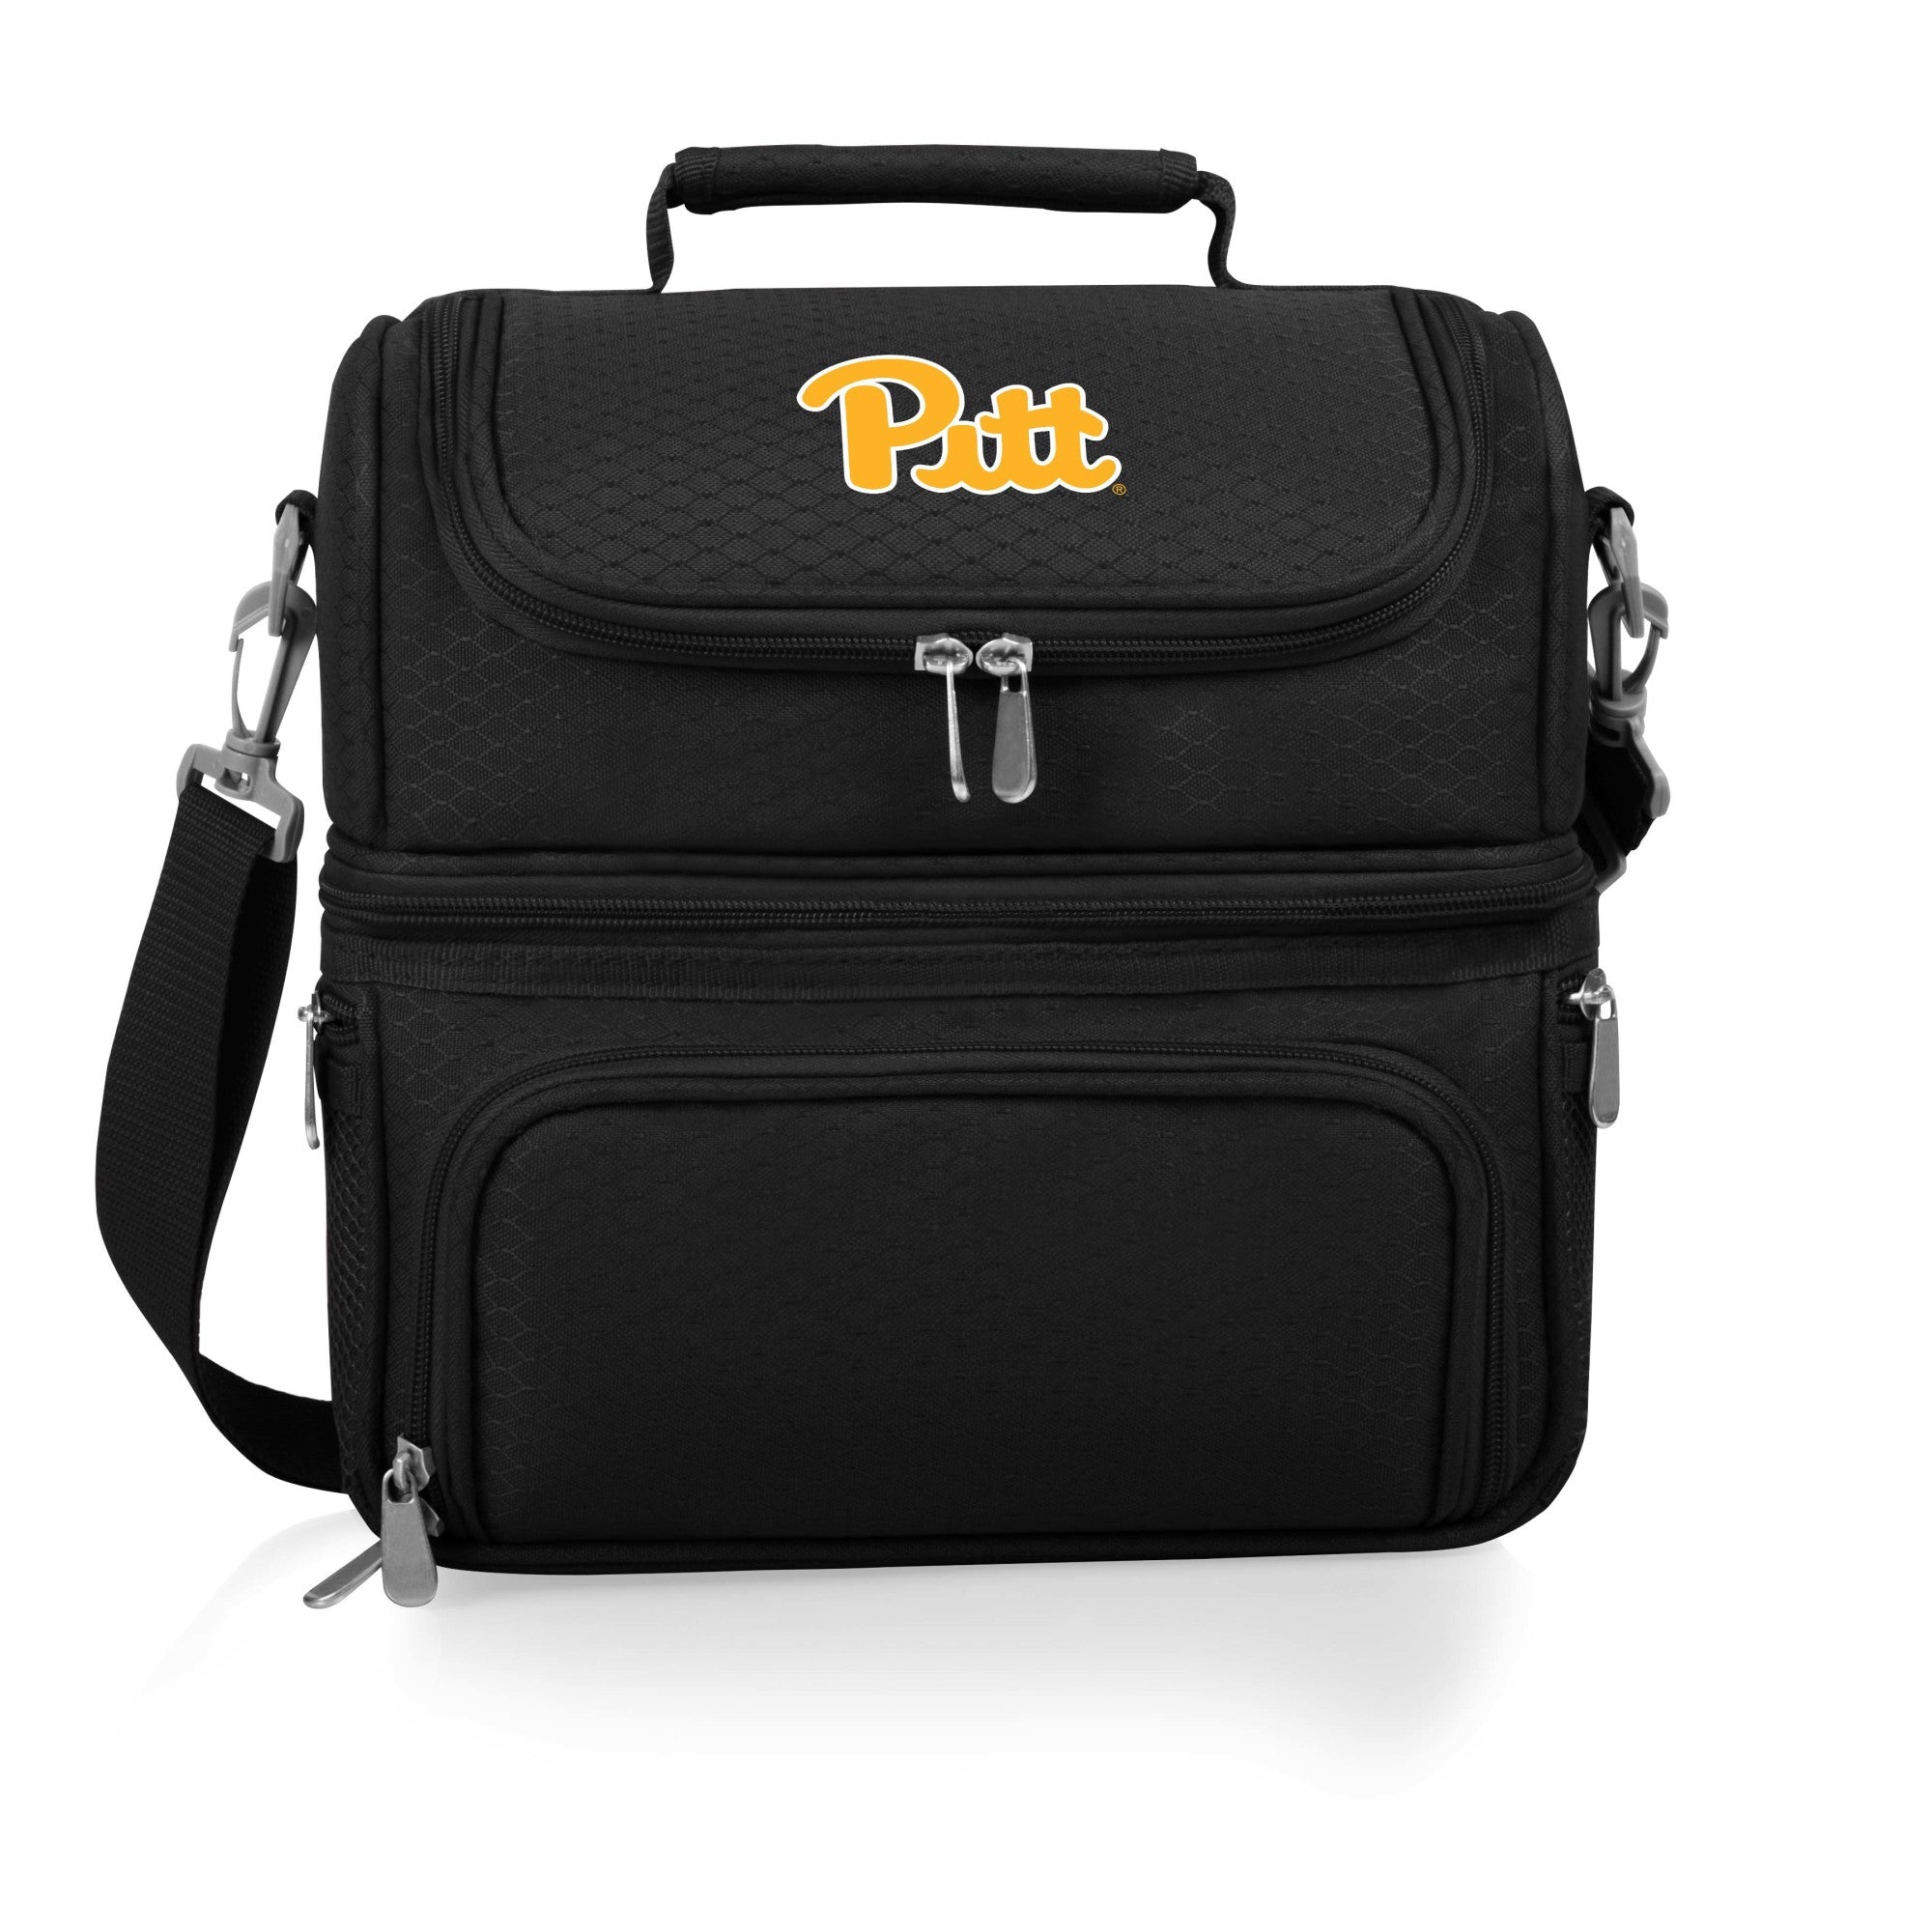 Pittsburgh Panthers - Pranzo Lunch Bag Cooler with Utensils